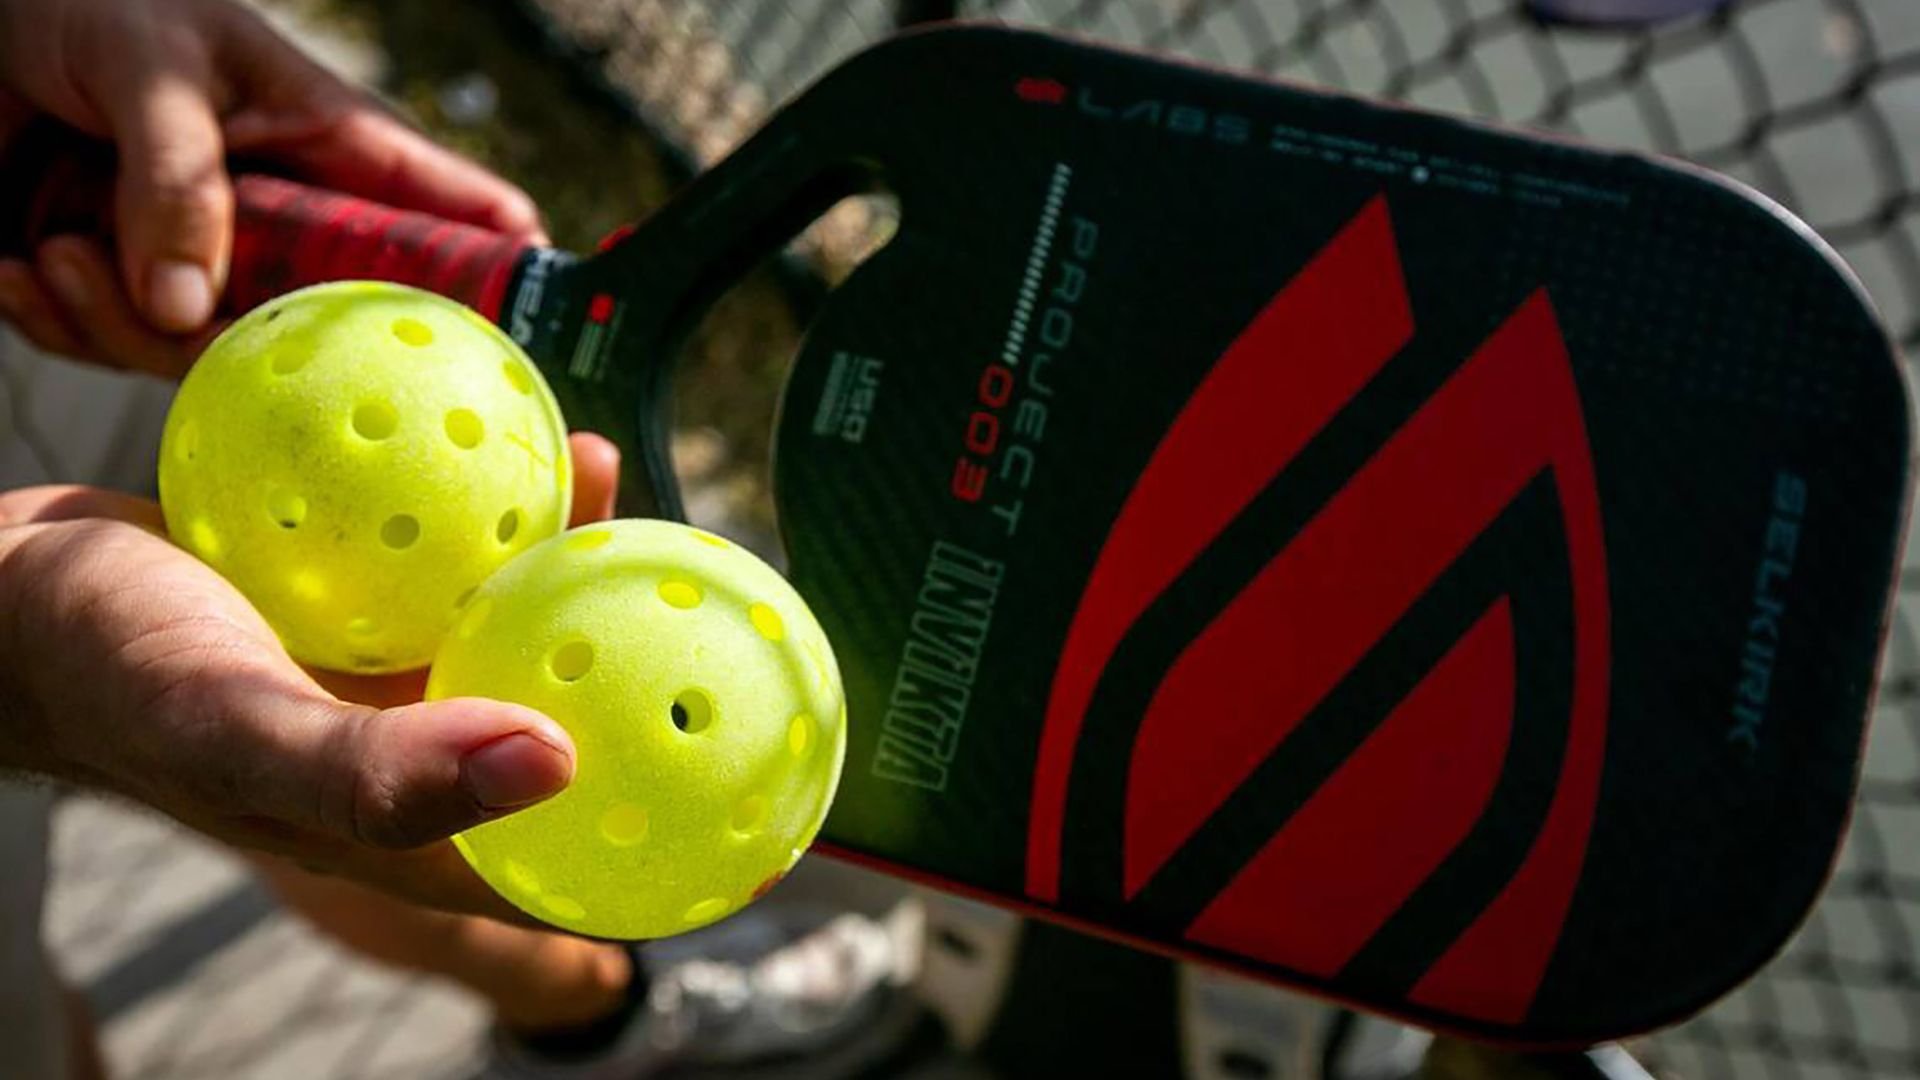 Big chains look to capitalize on pickleball craze